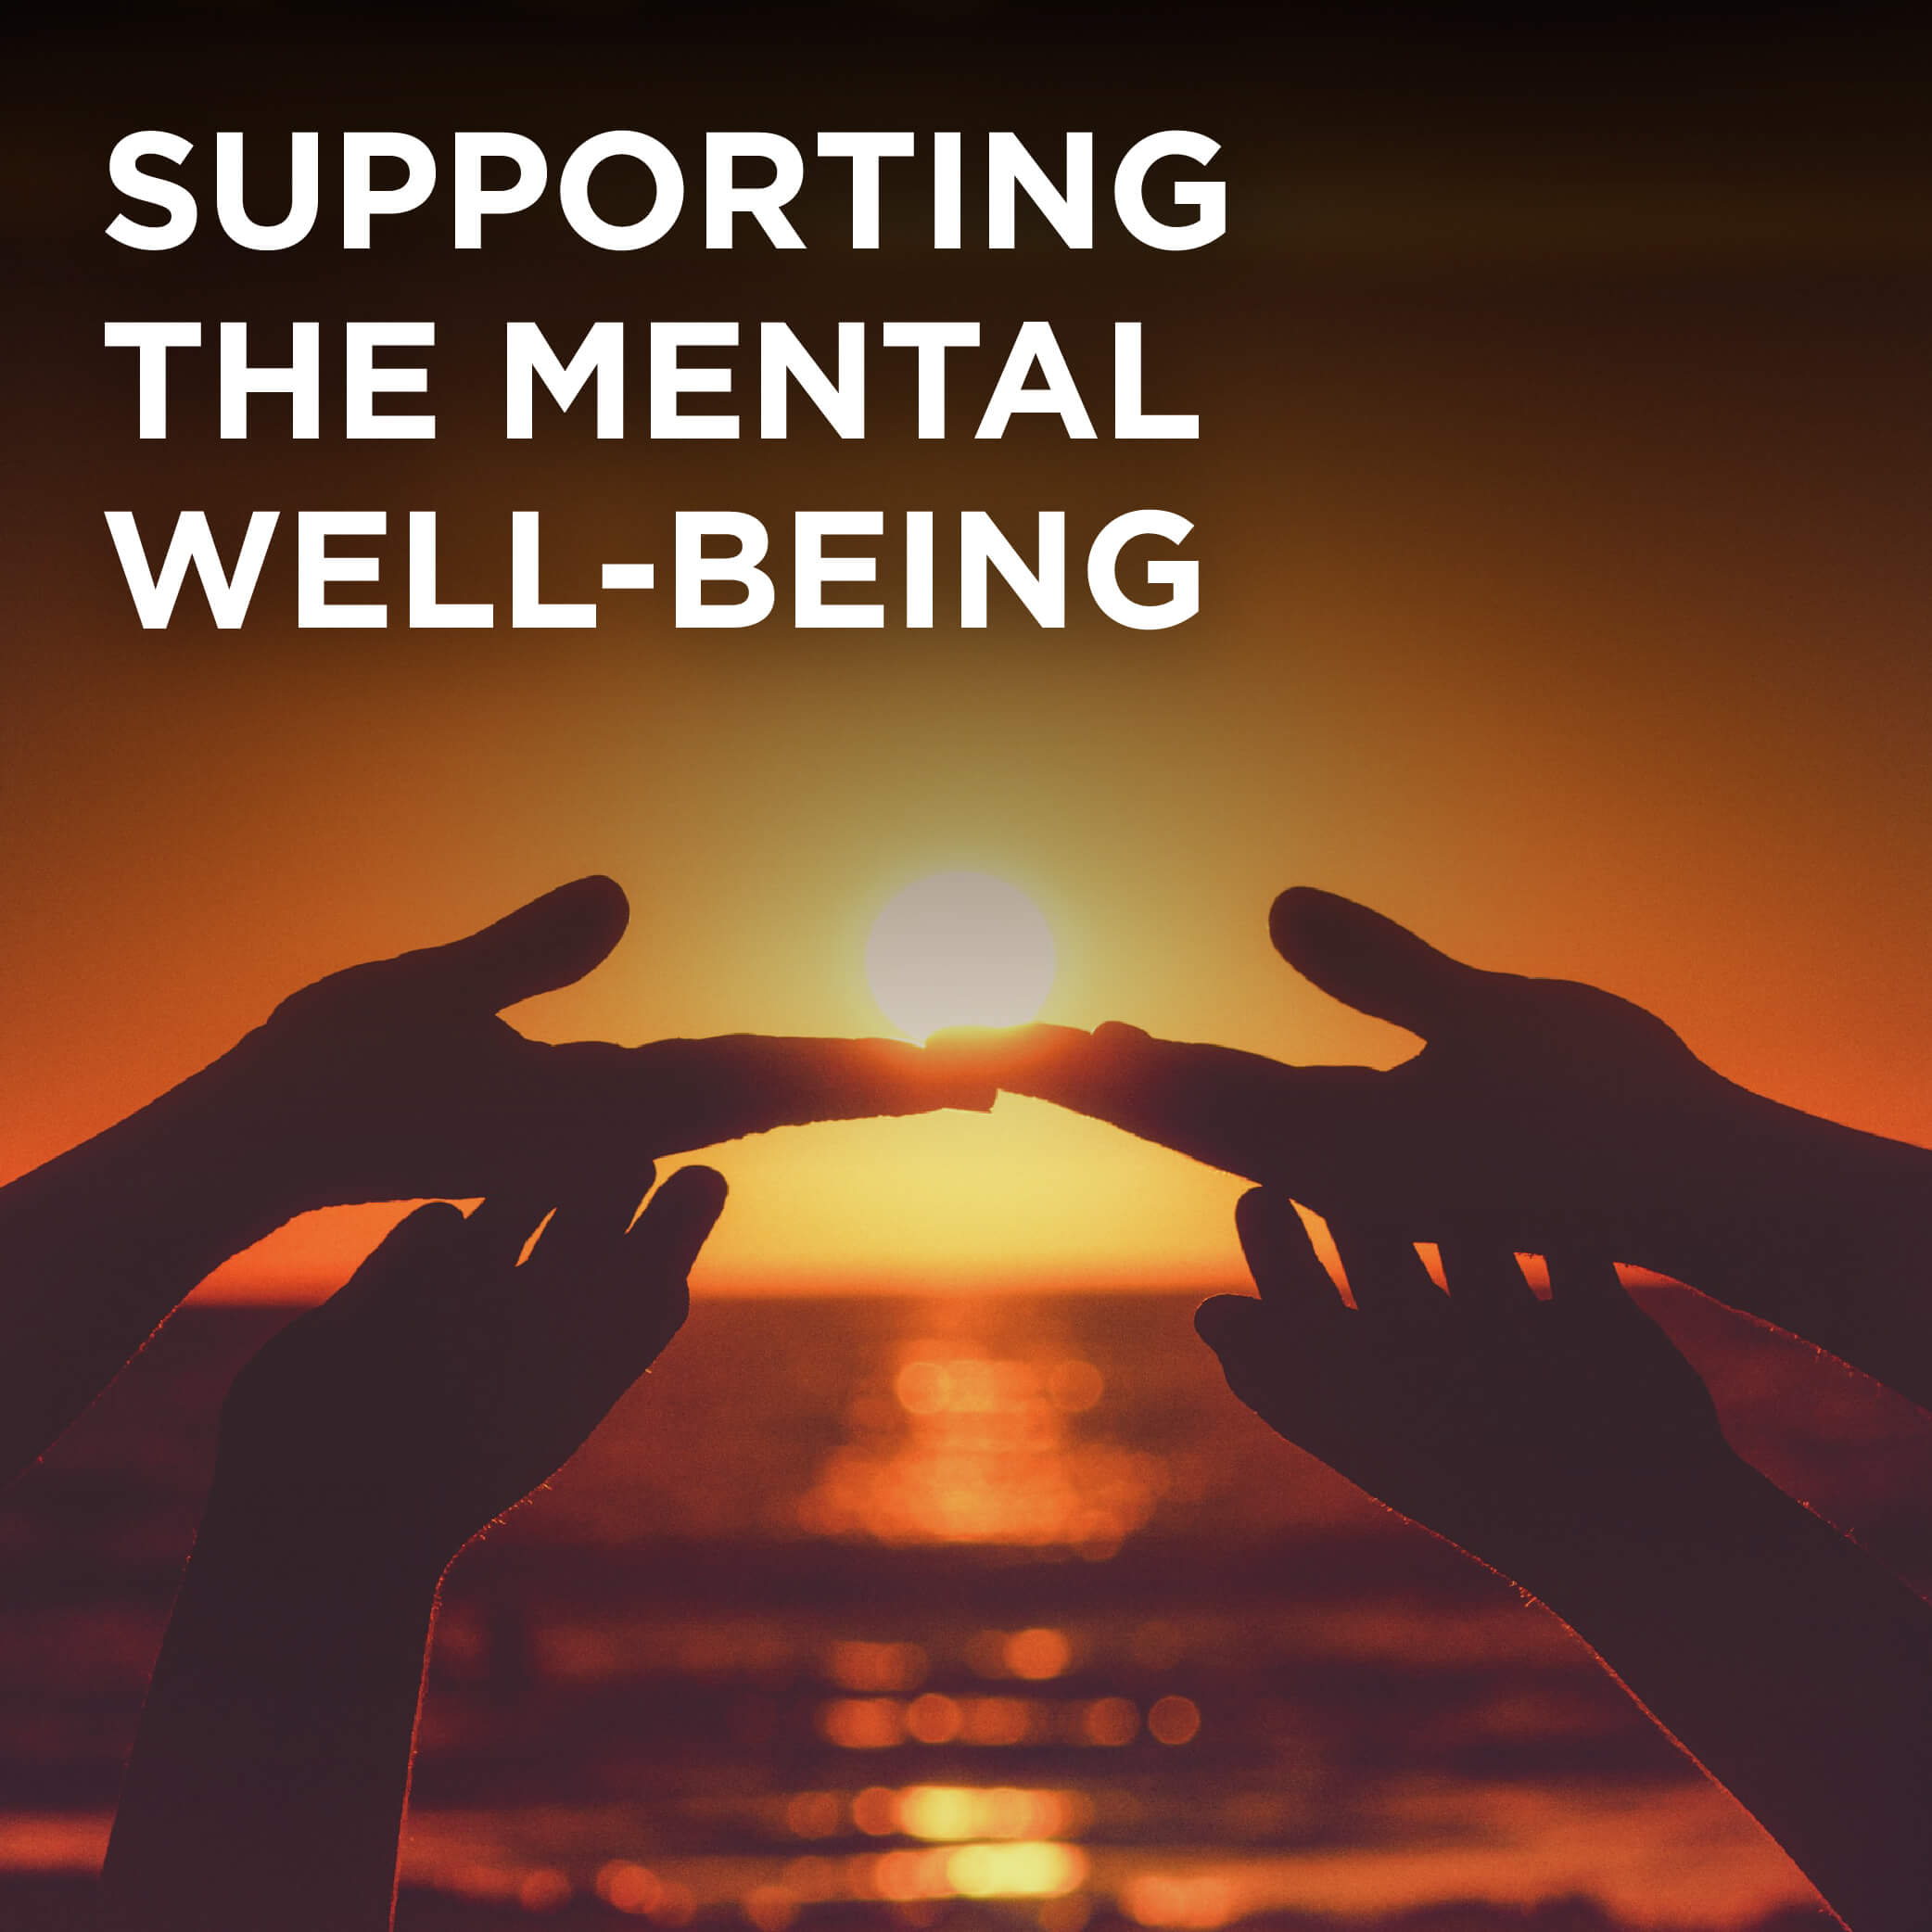  Supporting the mental well-being